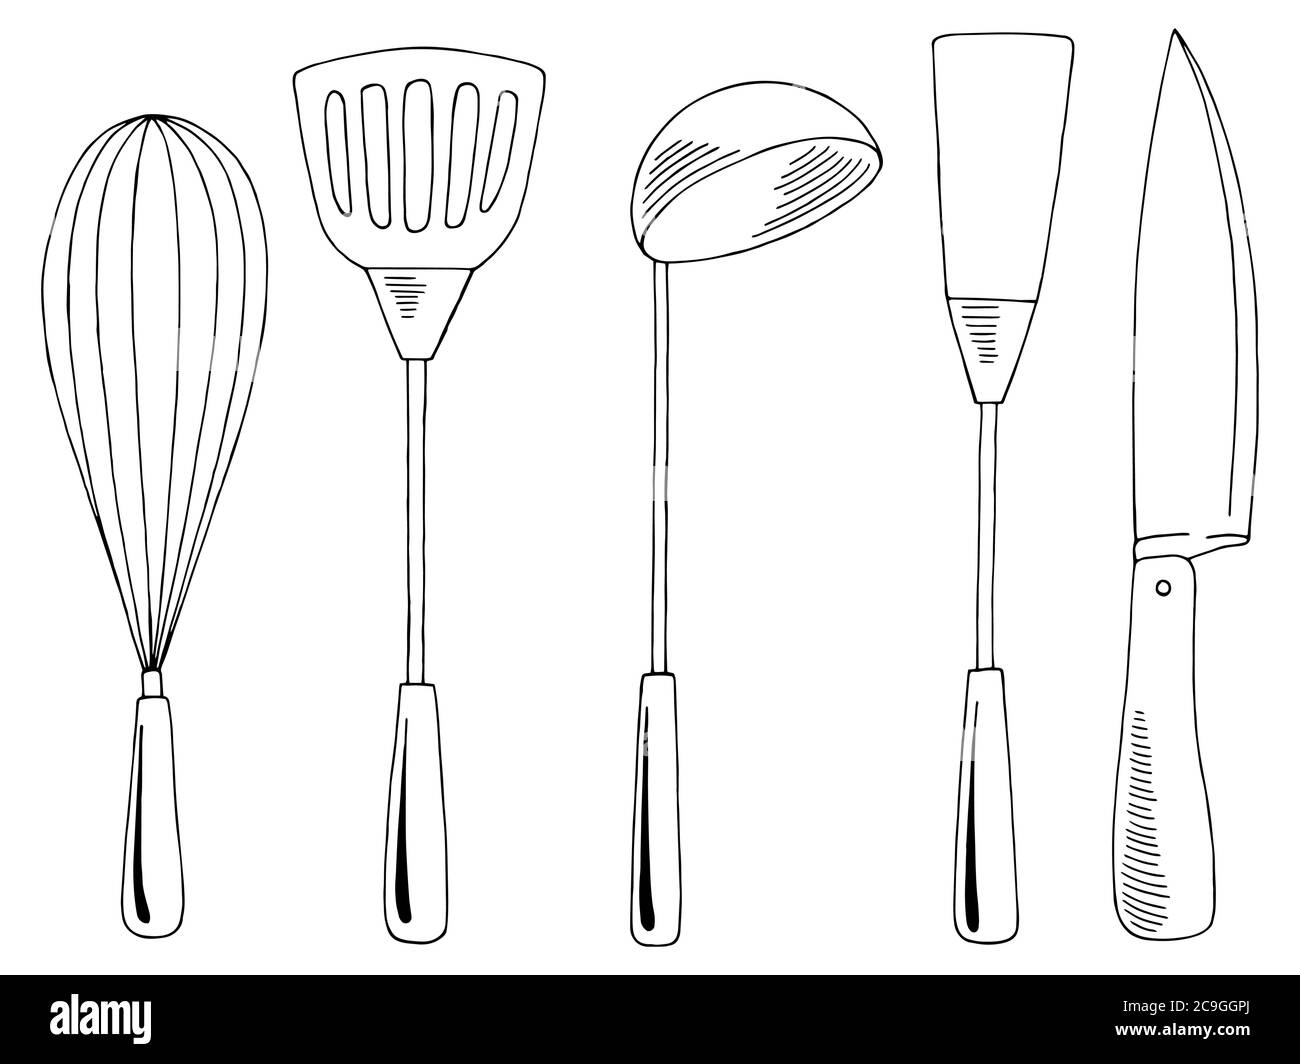 Kitchen supplies set graphic black white isolated sketch illustration vector Stock Vector